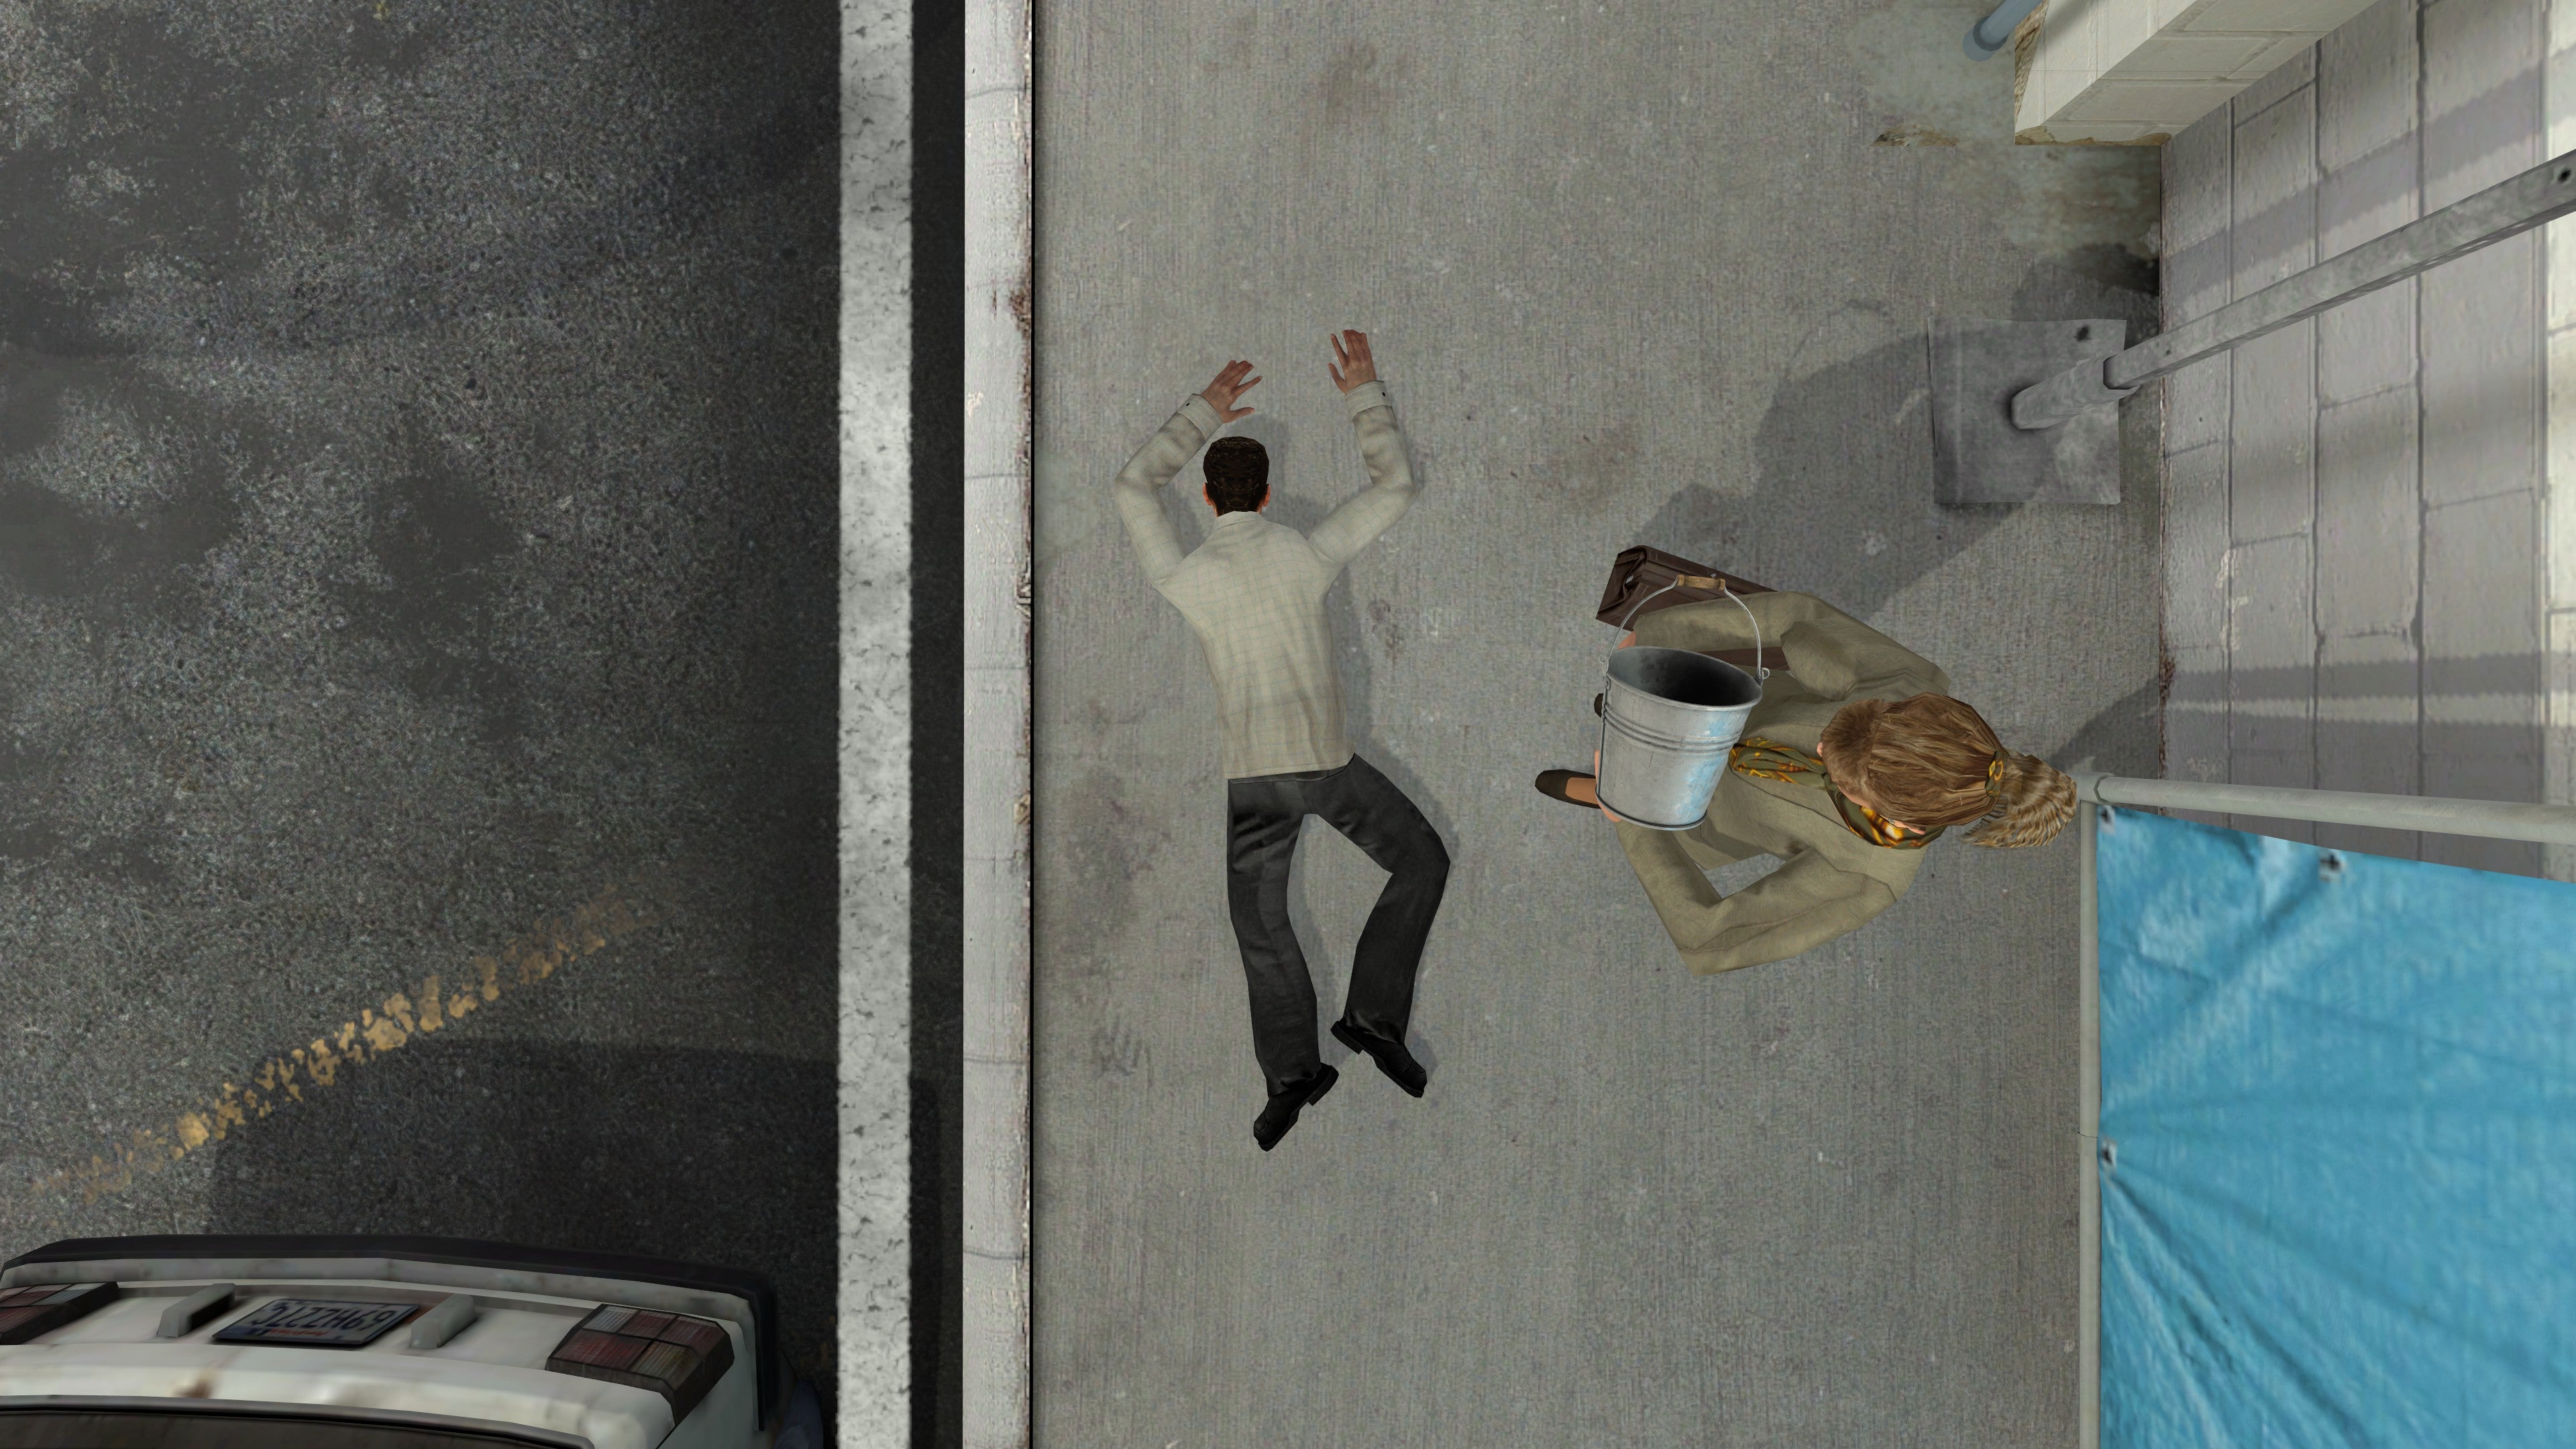 A man lies on the floor while a woman holding a bucket looks on in The Stanley Parable Ultra Deluxe